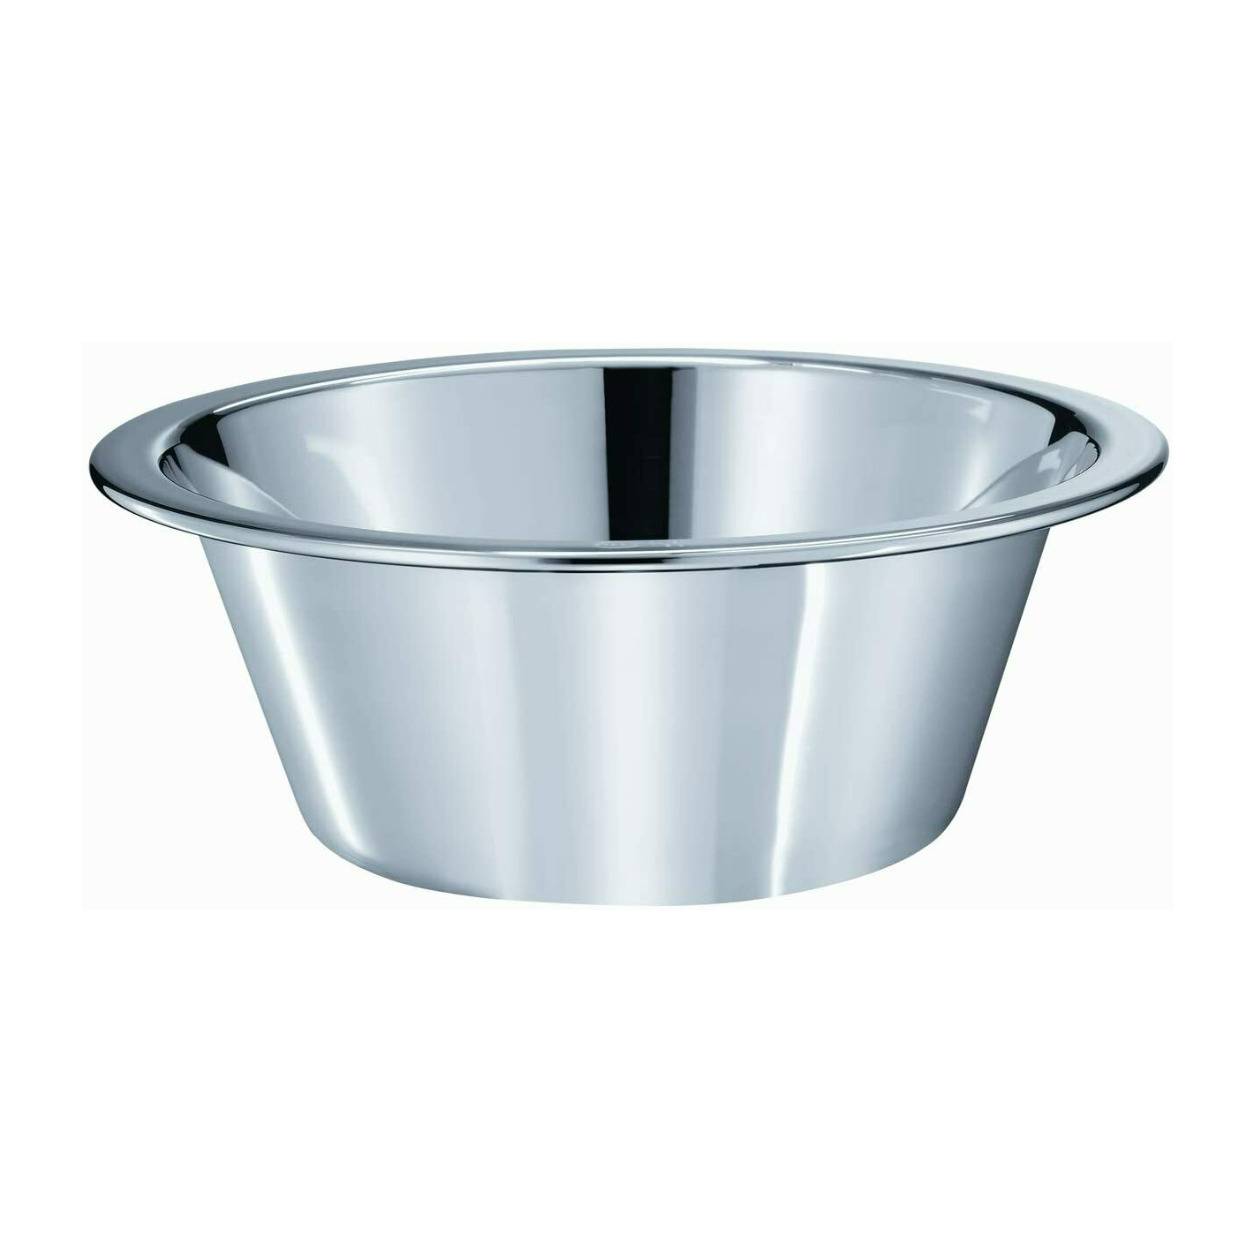 Rosle Stainless Steel Conical Bowl (7.08-Inch / 18cm)